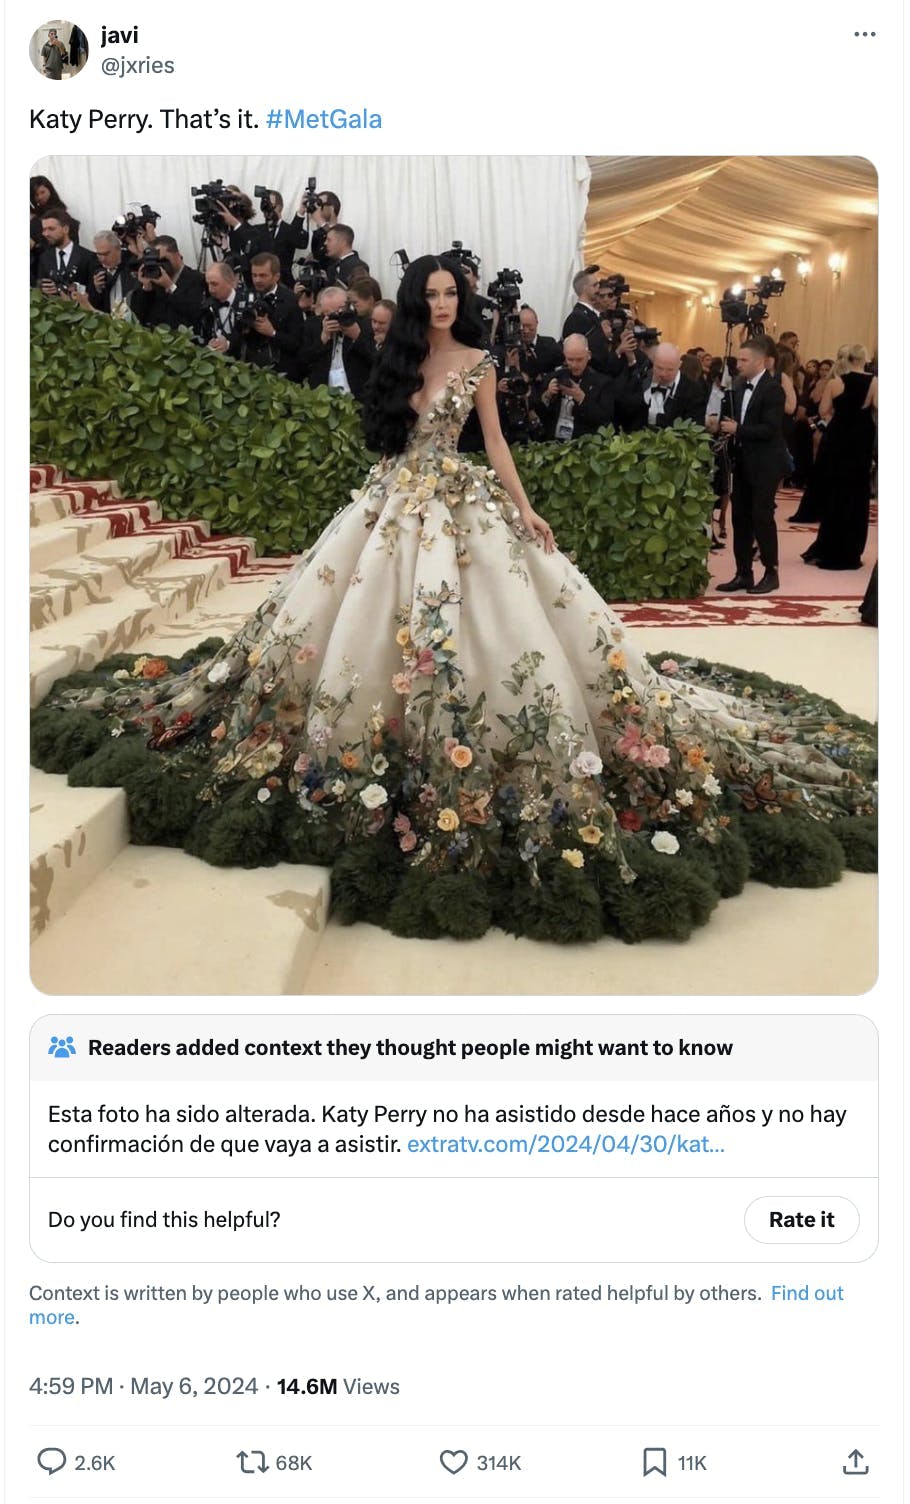 A screenshot of a tweet that reads, "Katy Perry. That's it. #MetGala." above an AI generated image of Katy Perry at this year's Met Gala wearing a long floral and moss gown.